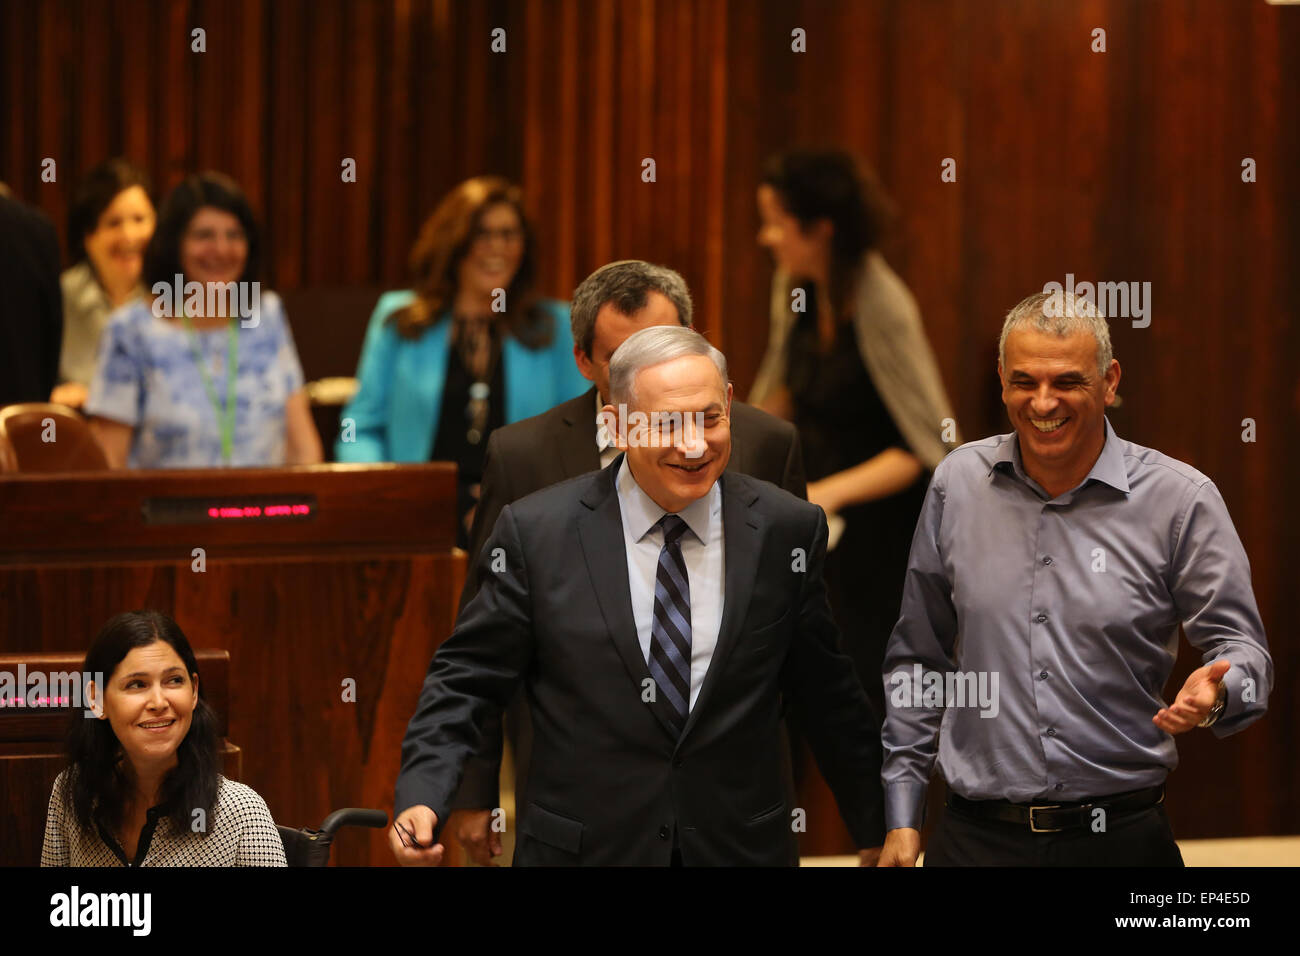 (150513) -- JERUSALEM, May 13, 2015 (Xinhua) -- Israeli Prime Minister Benjamin Netanyahu (C, front) reacts during a vote in the Israeli Knesset (parliament) in Jerusalem, on May 13, 2015. The Israeli Knesset (parliament) Wednesday voted in favor of a bill that will empower Prime Minister Benjamin Netanyahu to enlarge the number of cabinet positions in the new coalition government. (Xinhua/JINI) Stock Photo